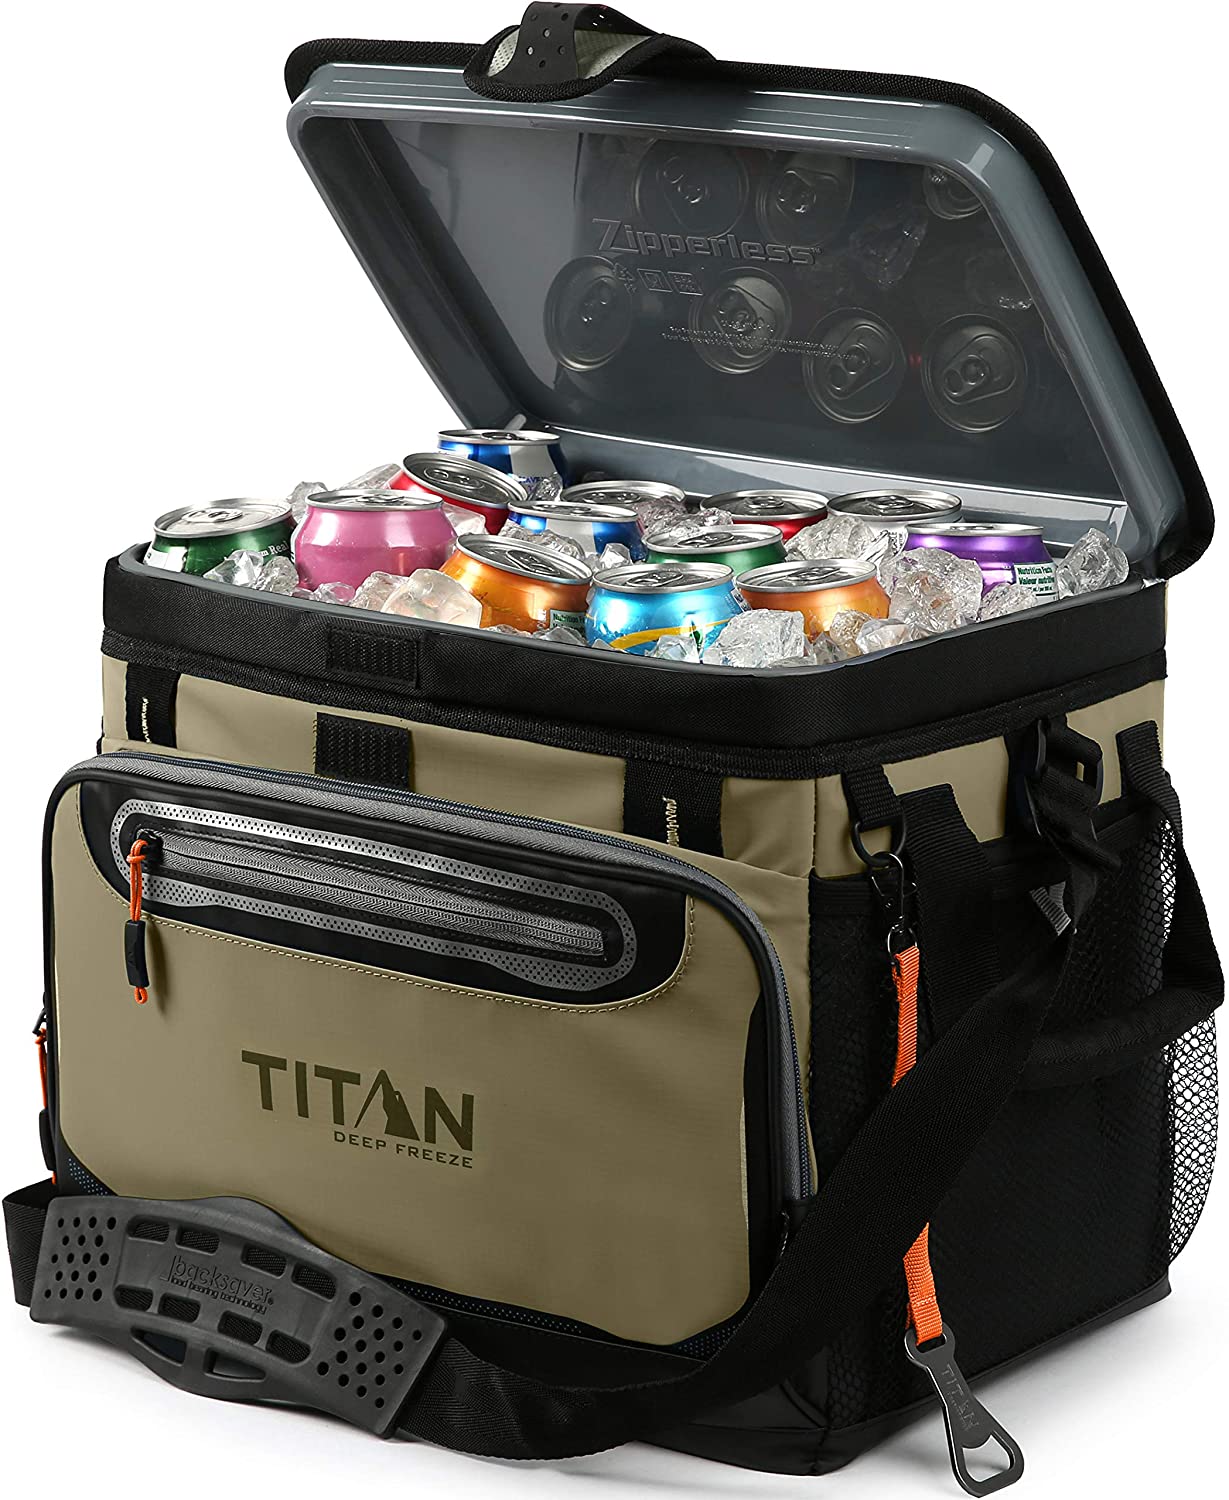 Arctic_Zone_Titan_Carry_Cooler_Cheaper_than_YETI_coolers